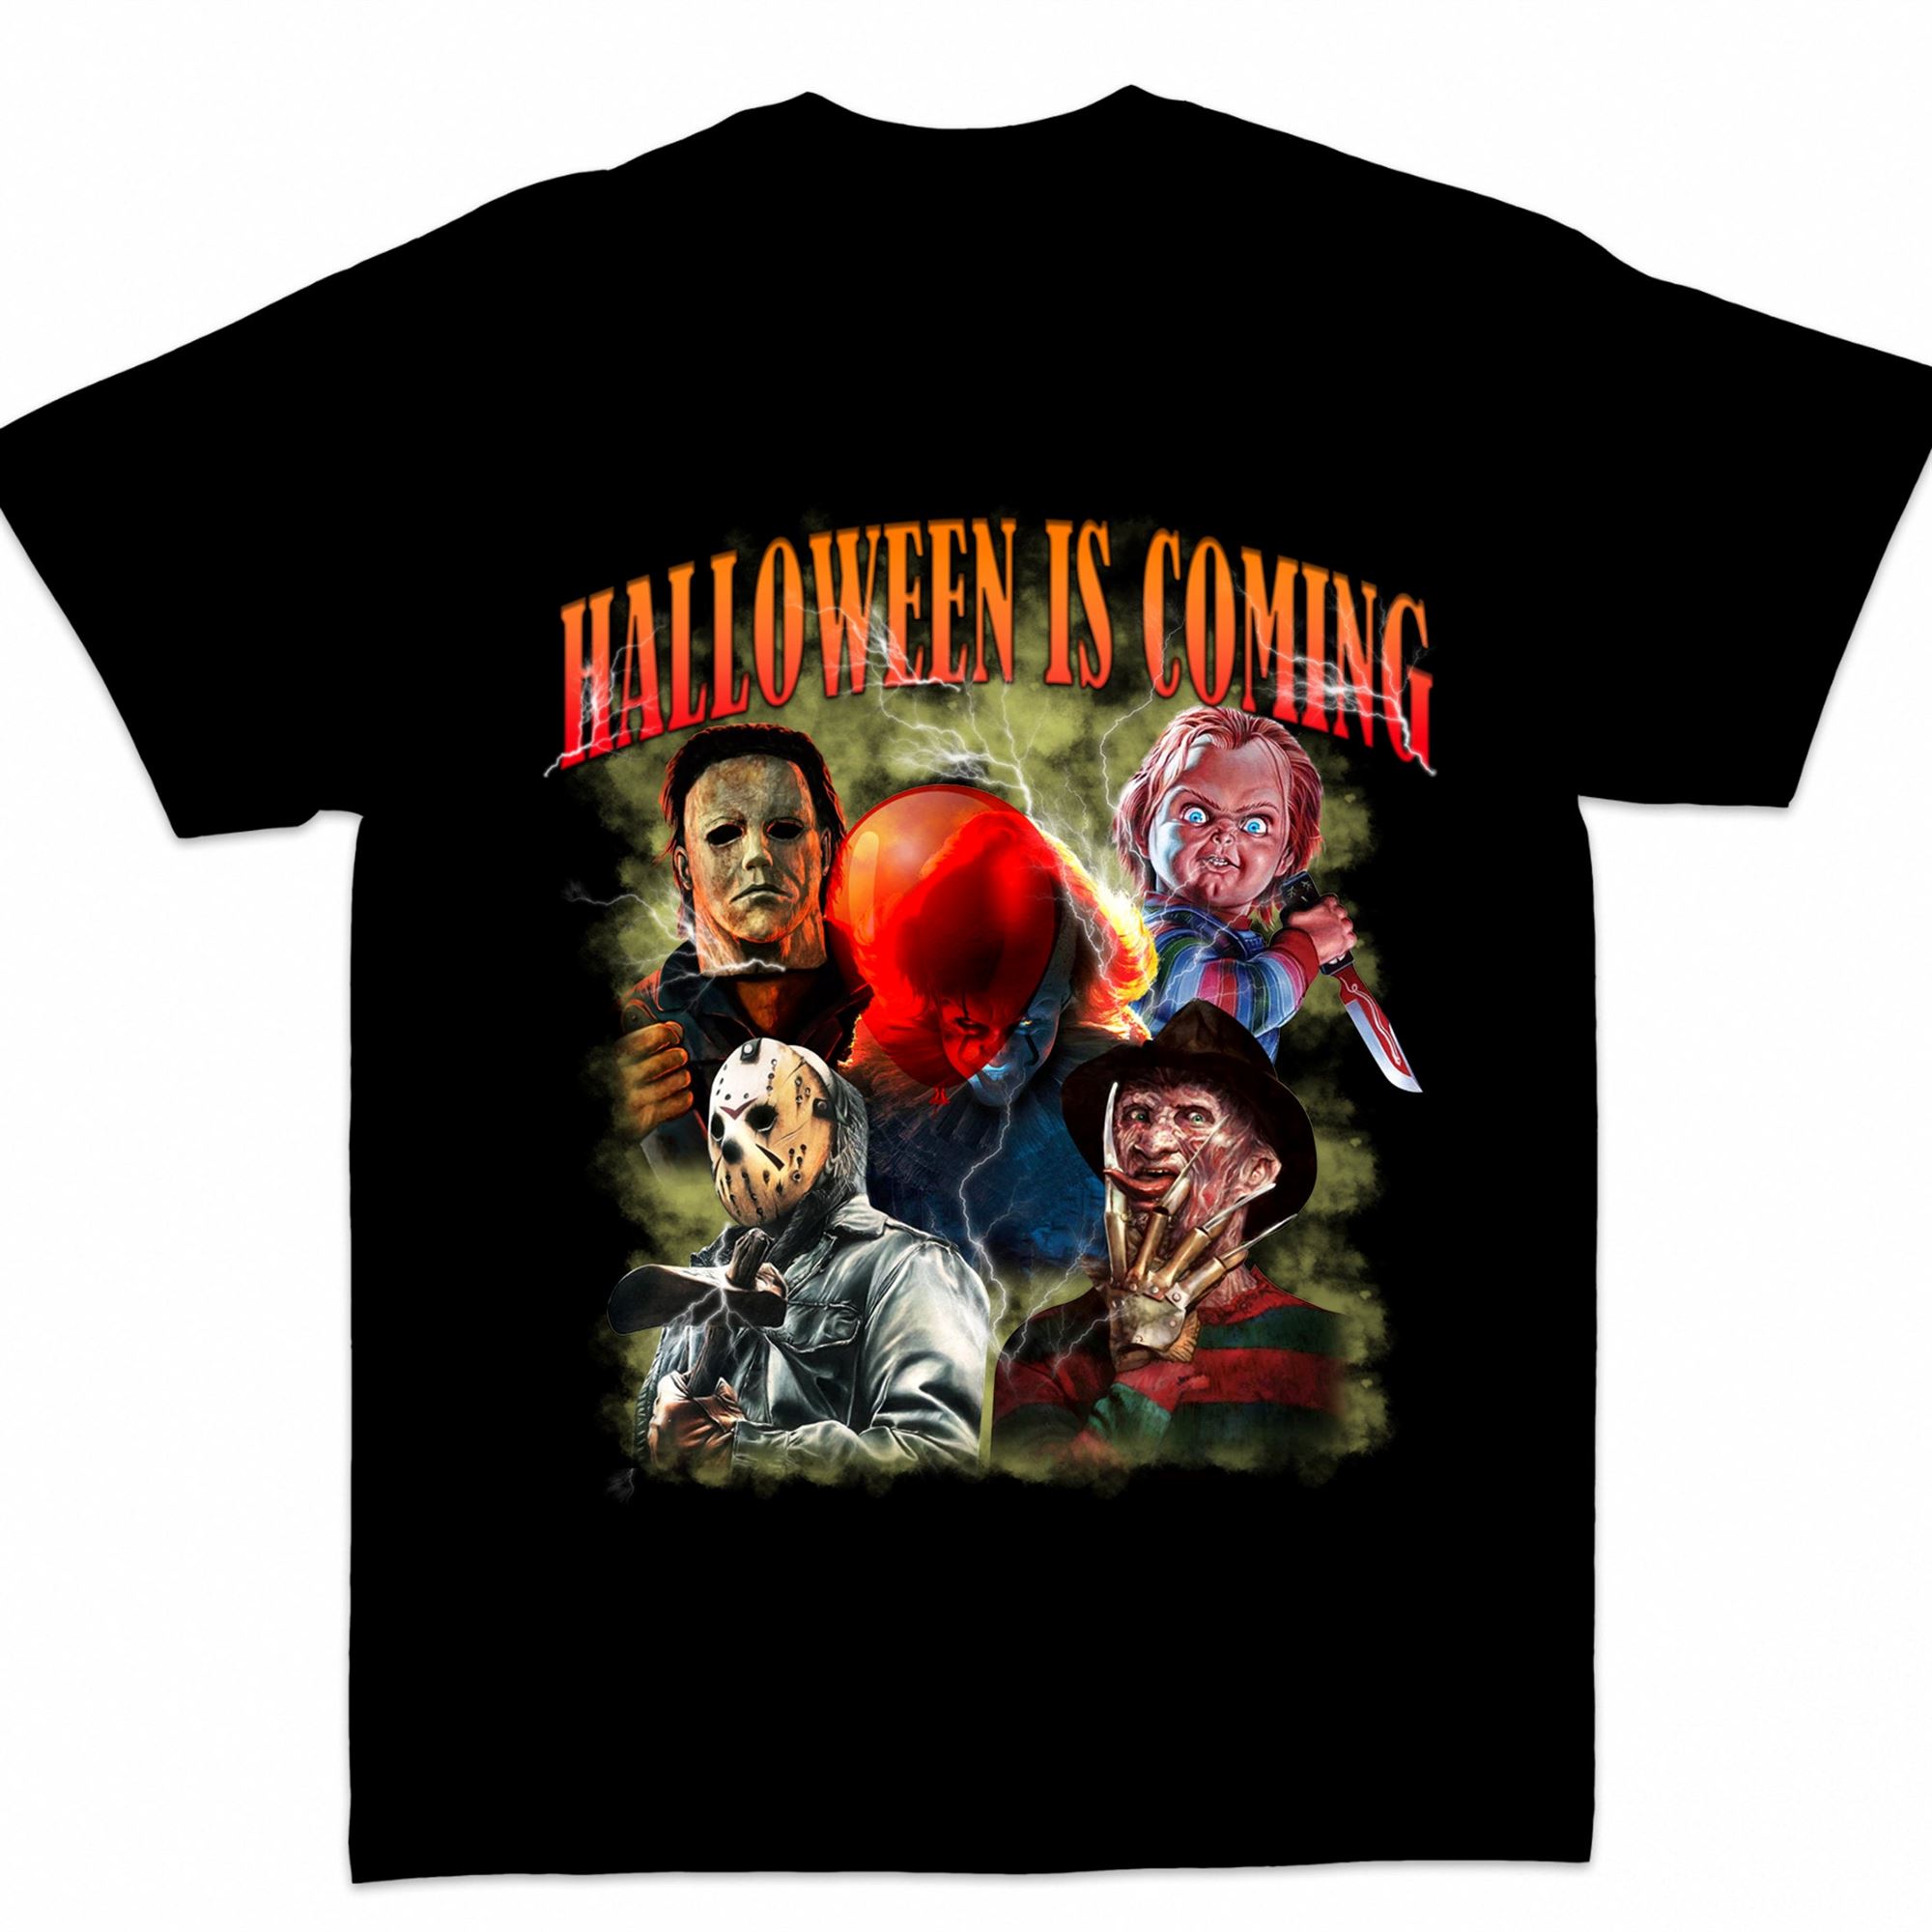 Halloween Is Coming T Shirt Halloween Horror Movie Killers Scary Friends Shirt Scary Halloween T Shirt For Men And Women